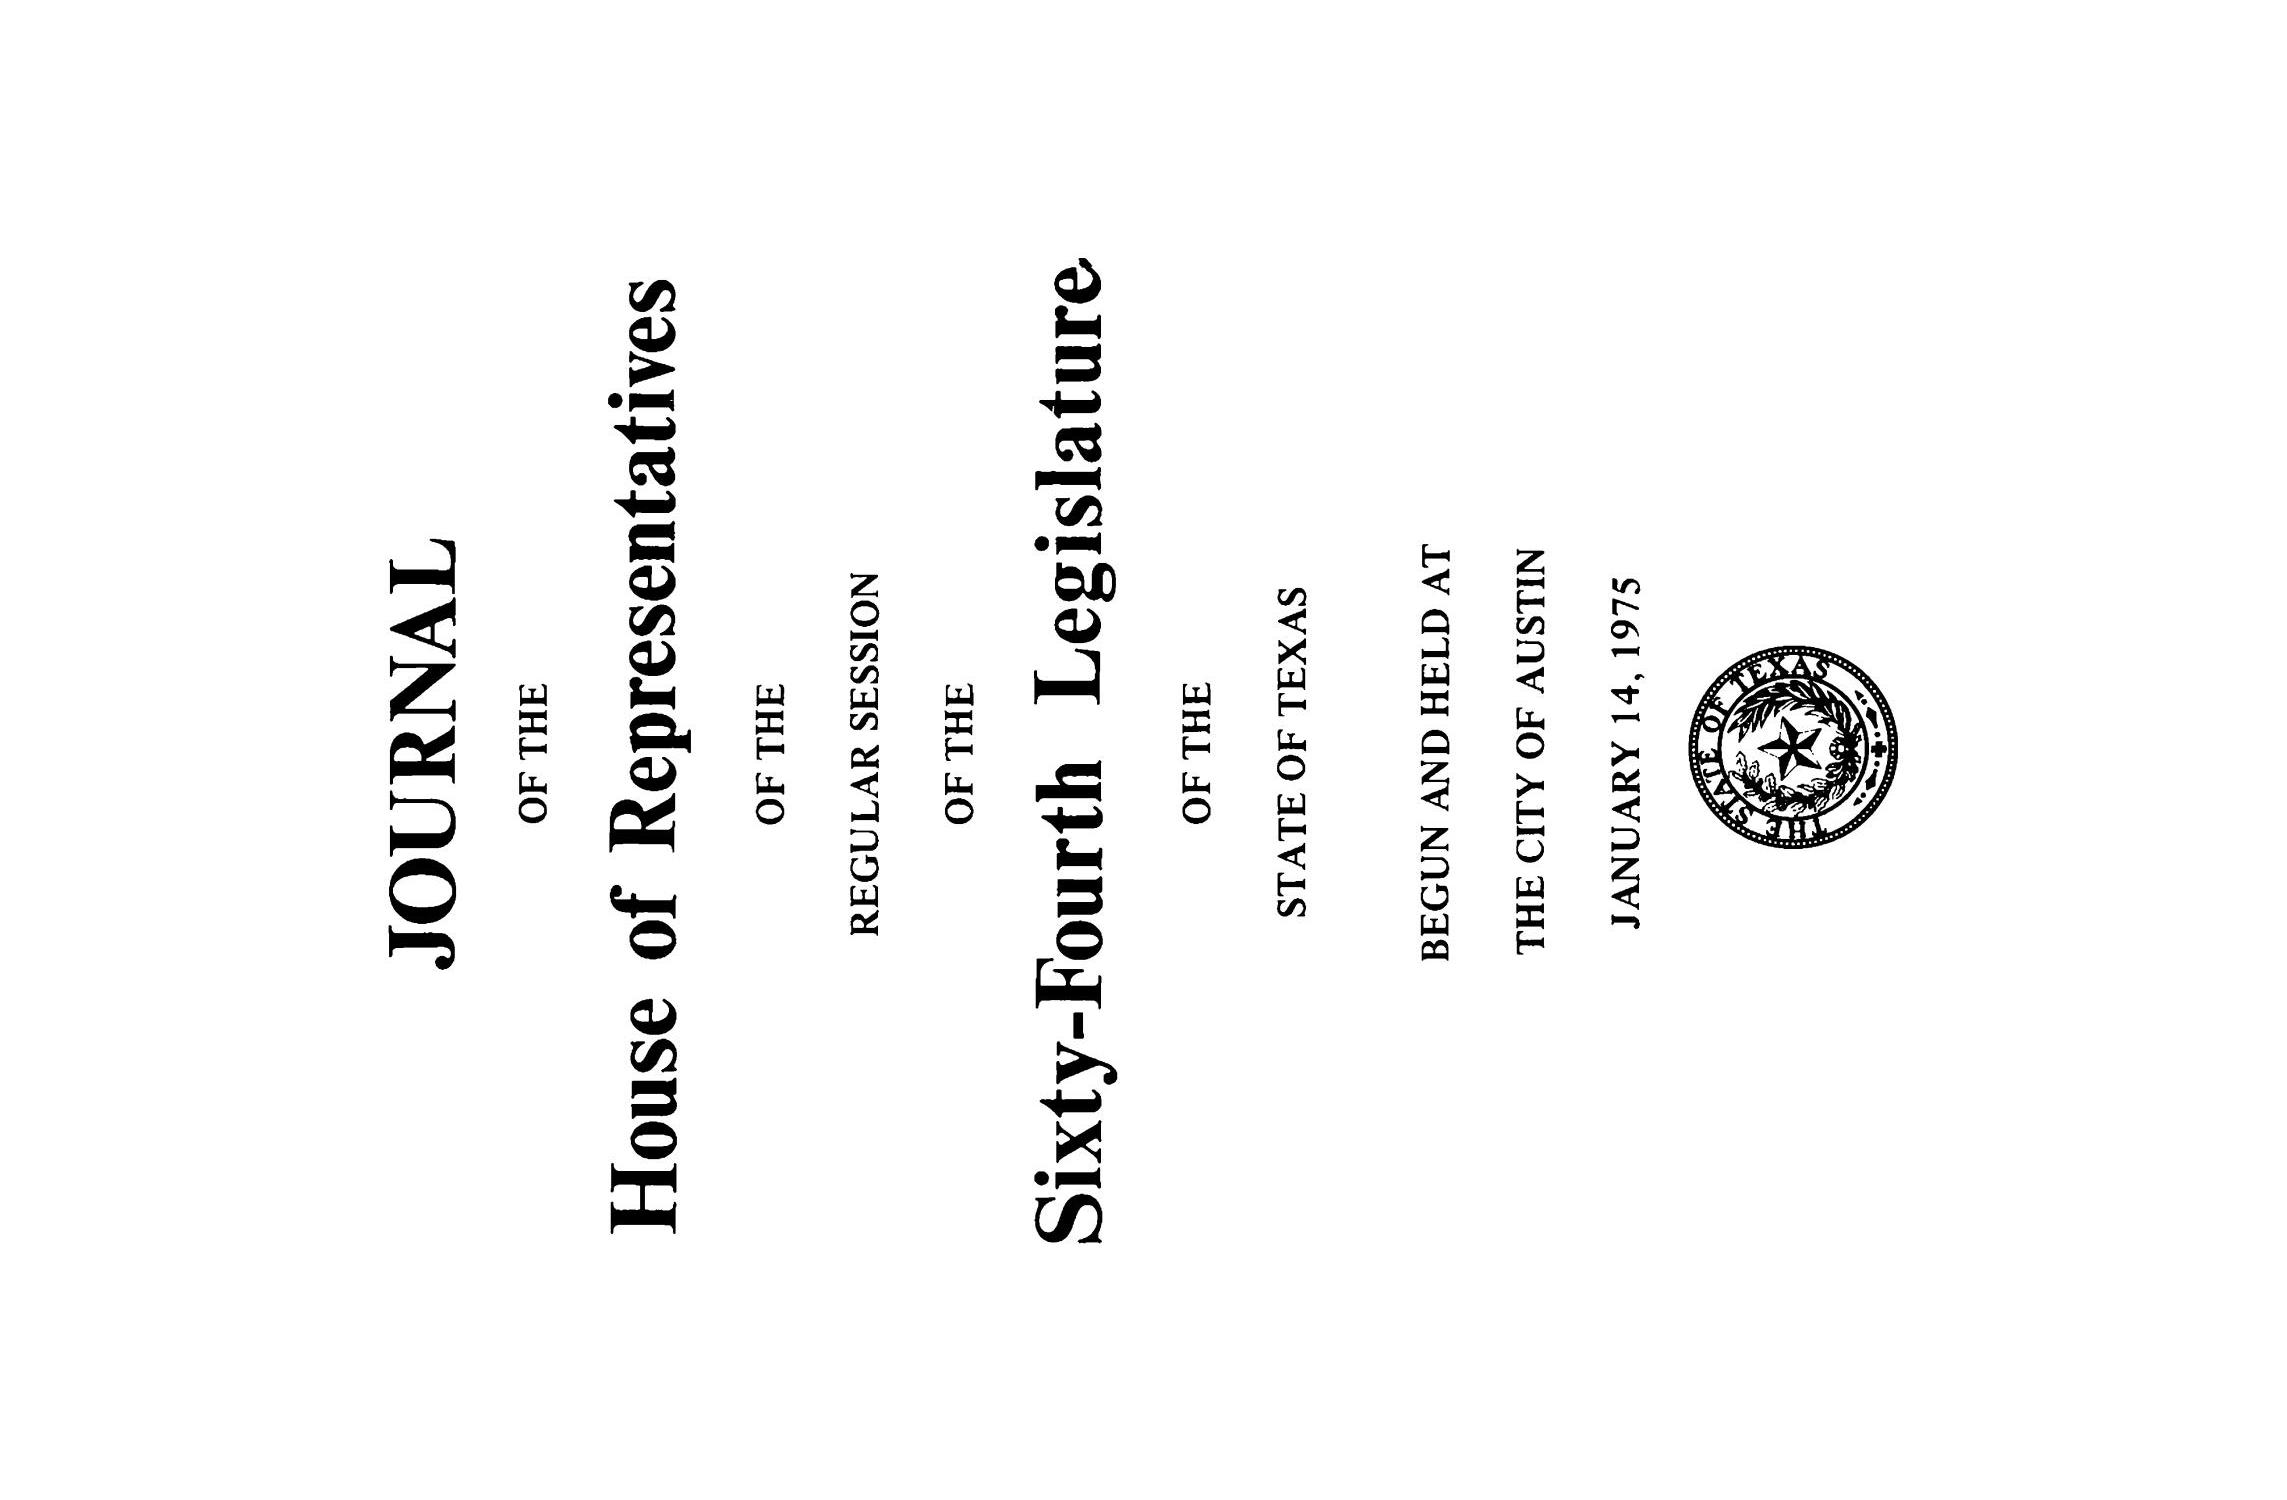 Journal of the House of Representatives of the Regular Session of the Sixty-Fourth Legislature of the State of Texas, Volume 1
                                                
                                                    Title Page
                                                